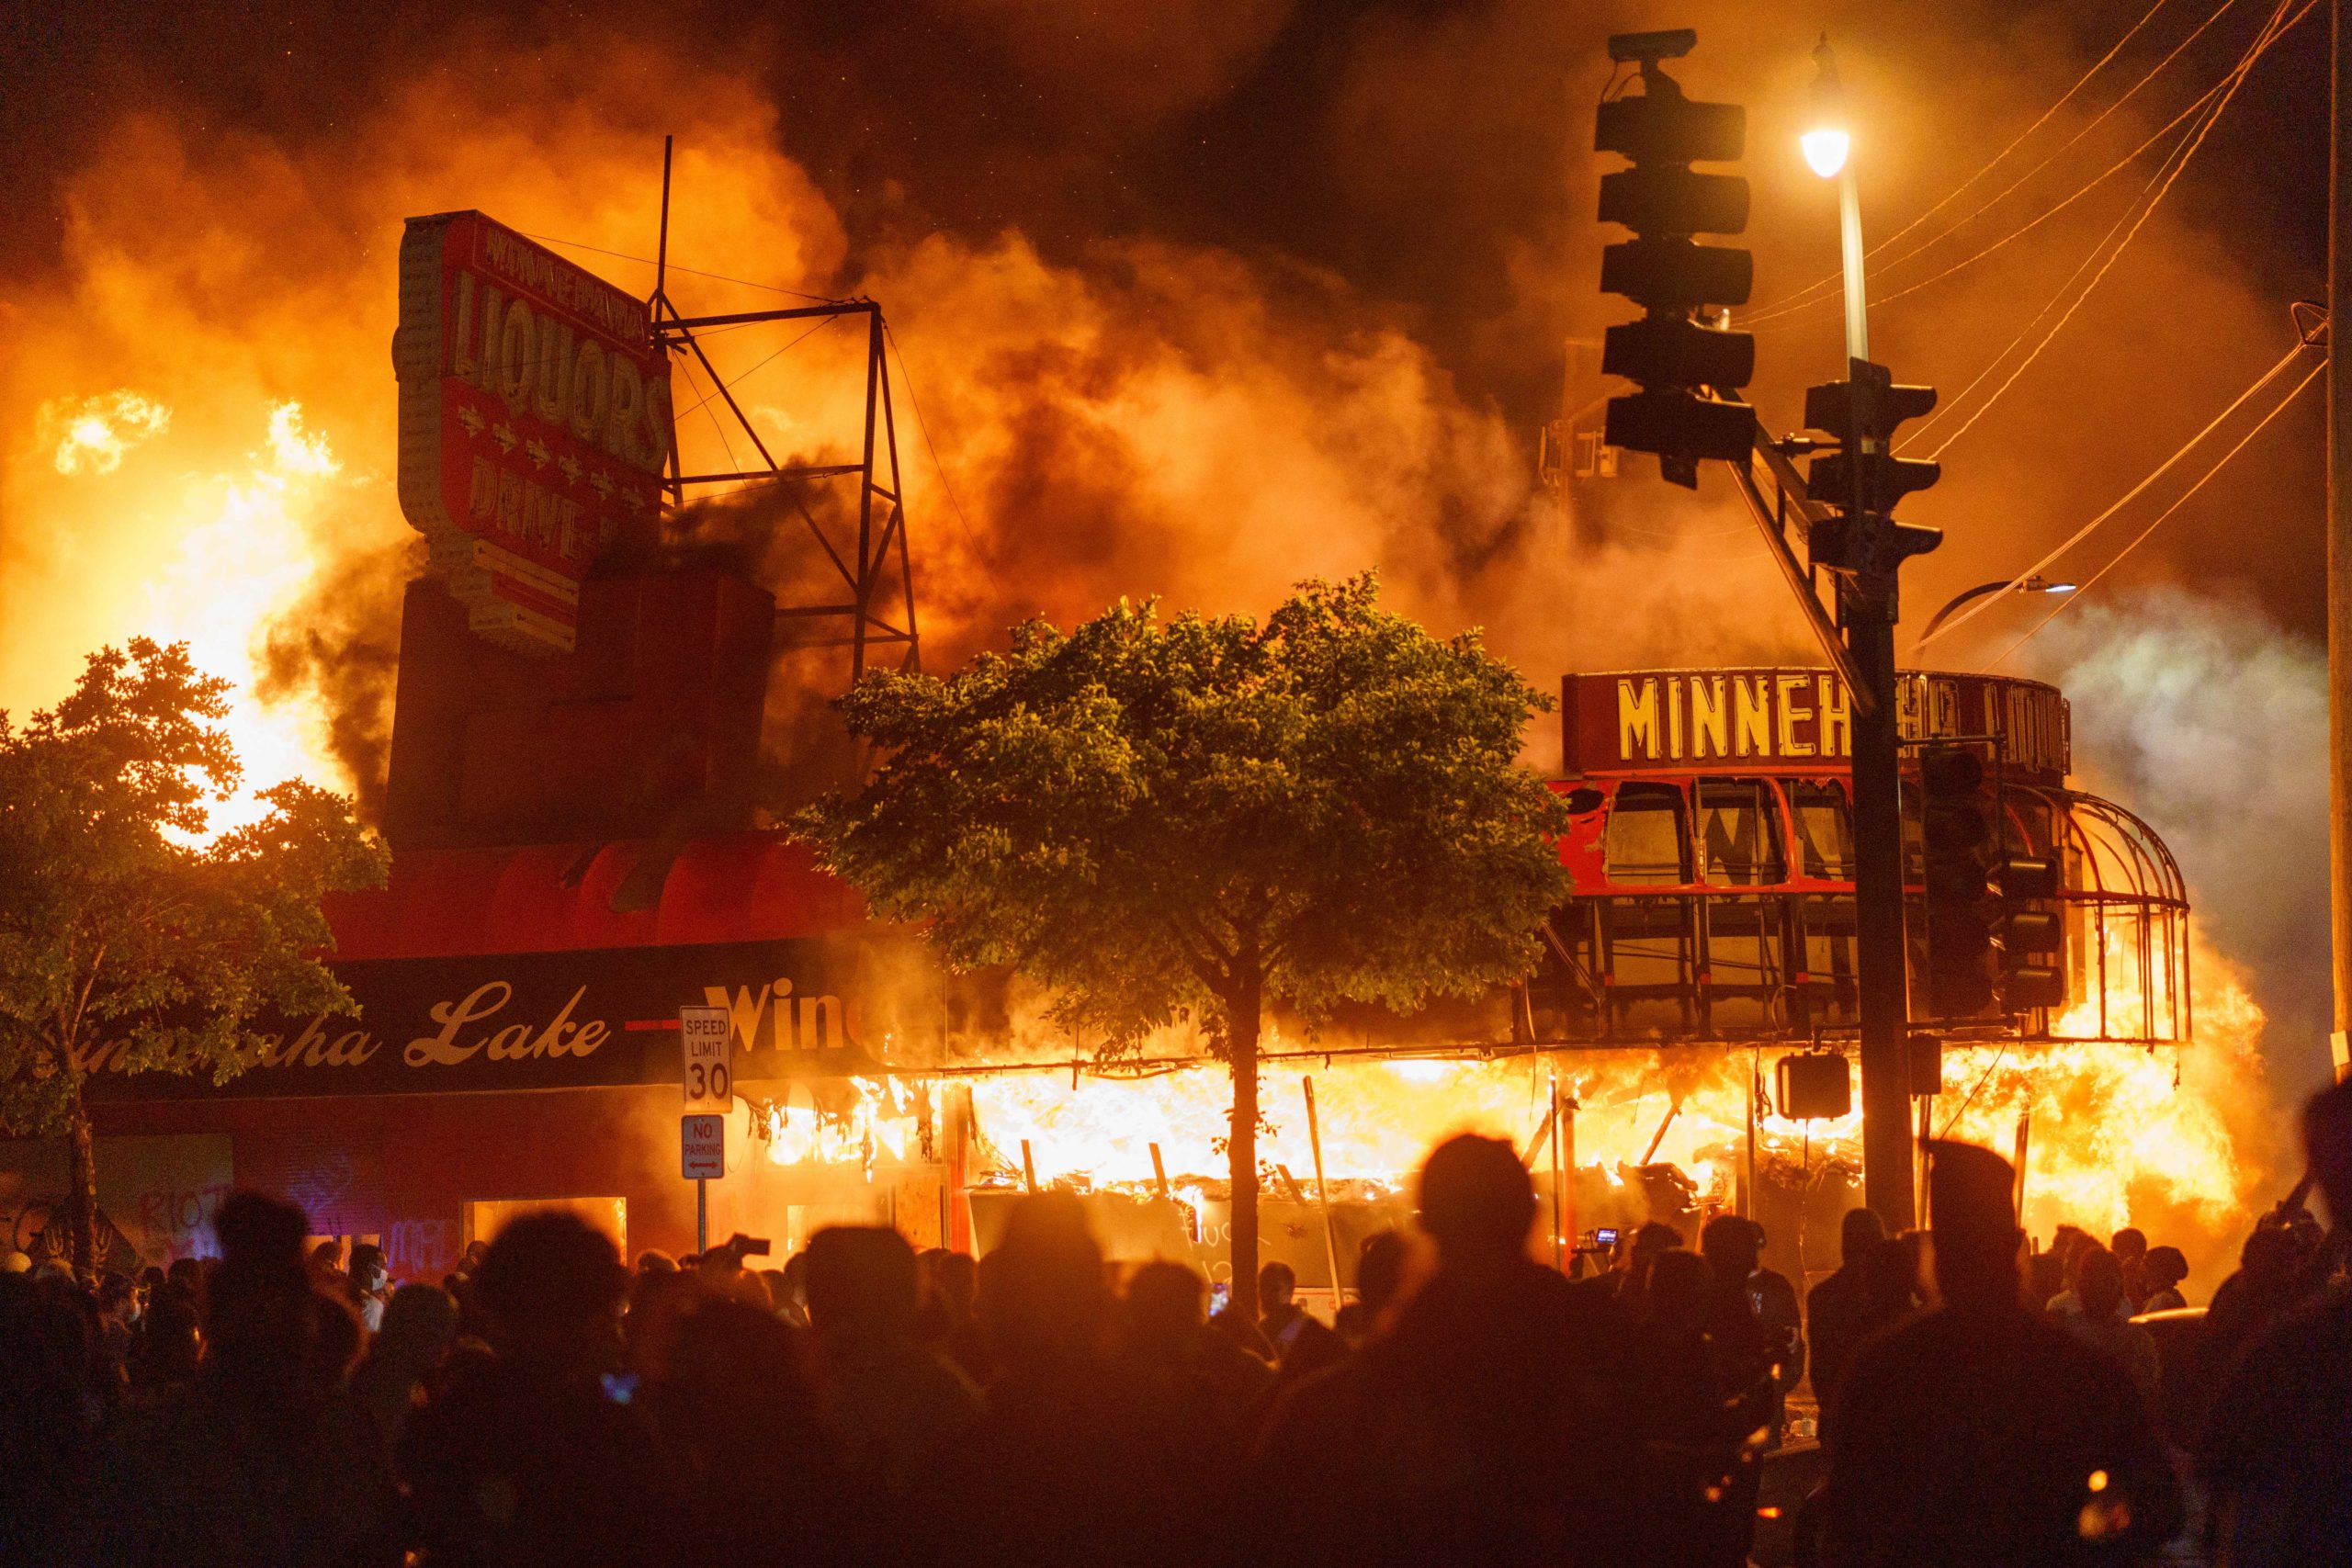 TOPSHOT - Protesters gather in front of a liquor store in flames near the Third Police Precinct on May 28, 2020 in Minneapolis, Minnesota, during a protest over the death of George Floyd, an unarmed black man, who died after a police officer kneeled on his neck for several minutes. - A police precinct in Minnesota went up in flames late on May 28 in a third day of demonstrations as the so-called Twin Cities of Minneapolis and St. Paul seethed over the shocking police killing of a handcuffed black man. The precinct, which police had abandoned, burned after a group of protesters pushed through barriers around the building, breaking windows and chanting slogans. A much larger crowd demonstrated as the building went up in flames. (Photo by kerem yucel / AFP) (Photo by KEREM YUCEL/AFP via Getty Images)